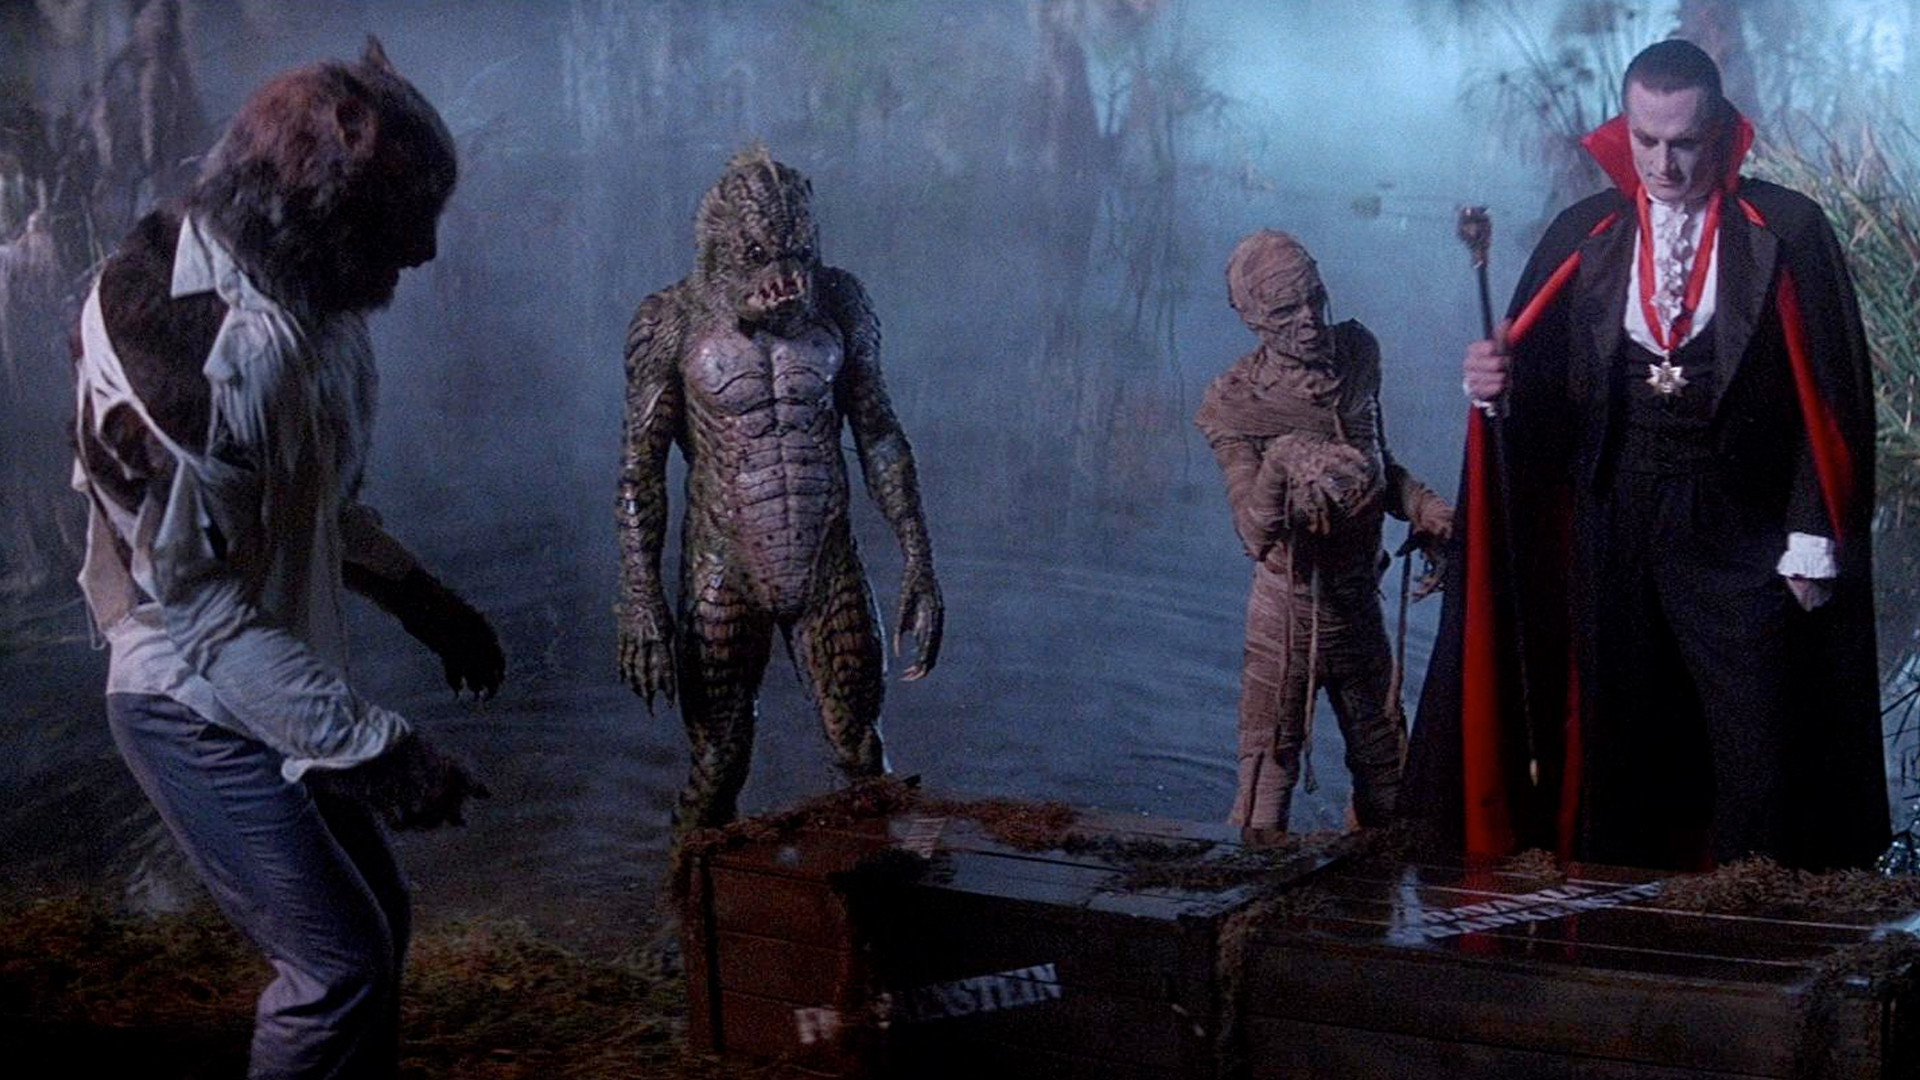 The Drew Reviews: 31 DAYS OF DREW - DAY 22: THE MONSTER SQUAD